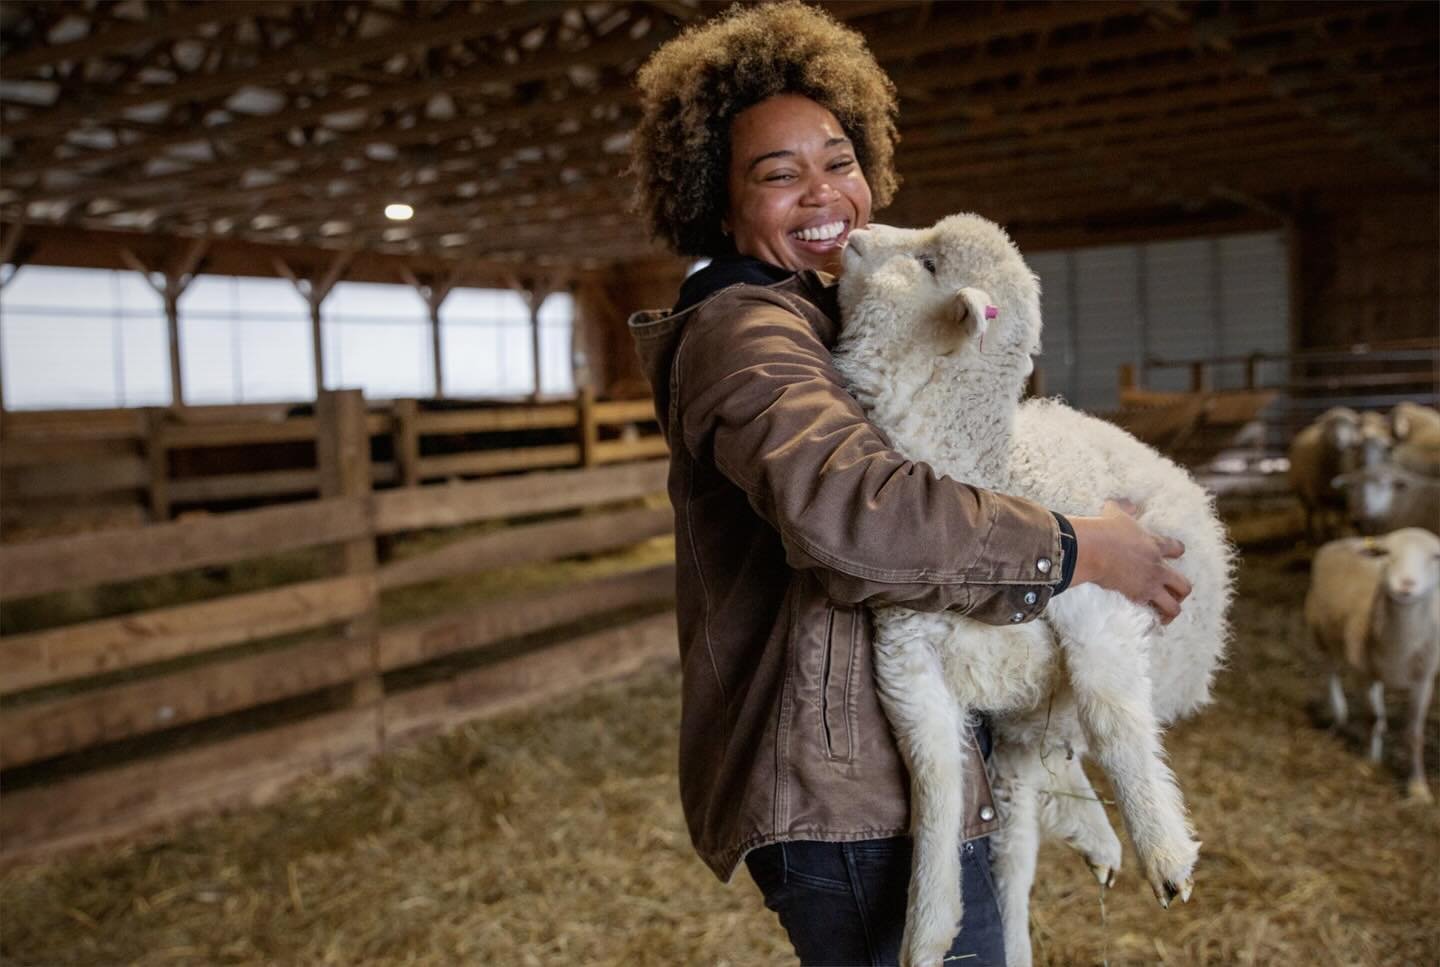 Farmer feature for our next culinary industry night on 5/13 🌱

@glynwoodorg is a nonprofit organization directly serving local food and farming changemakers in New York&rsquo;s Hudson Valley, with a national impact beyond our regional borders. Their